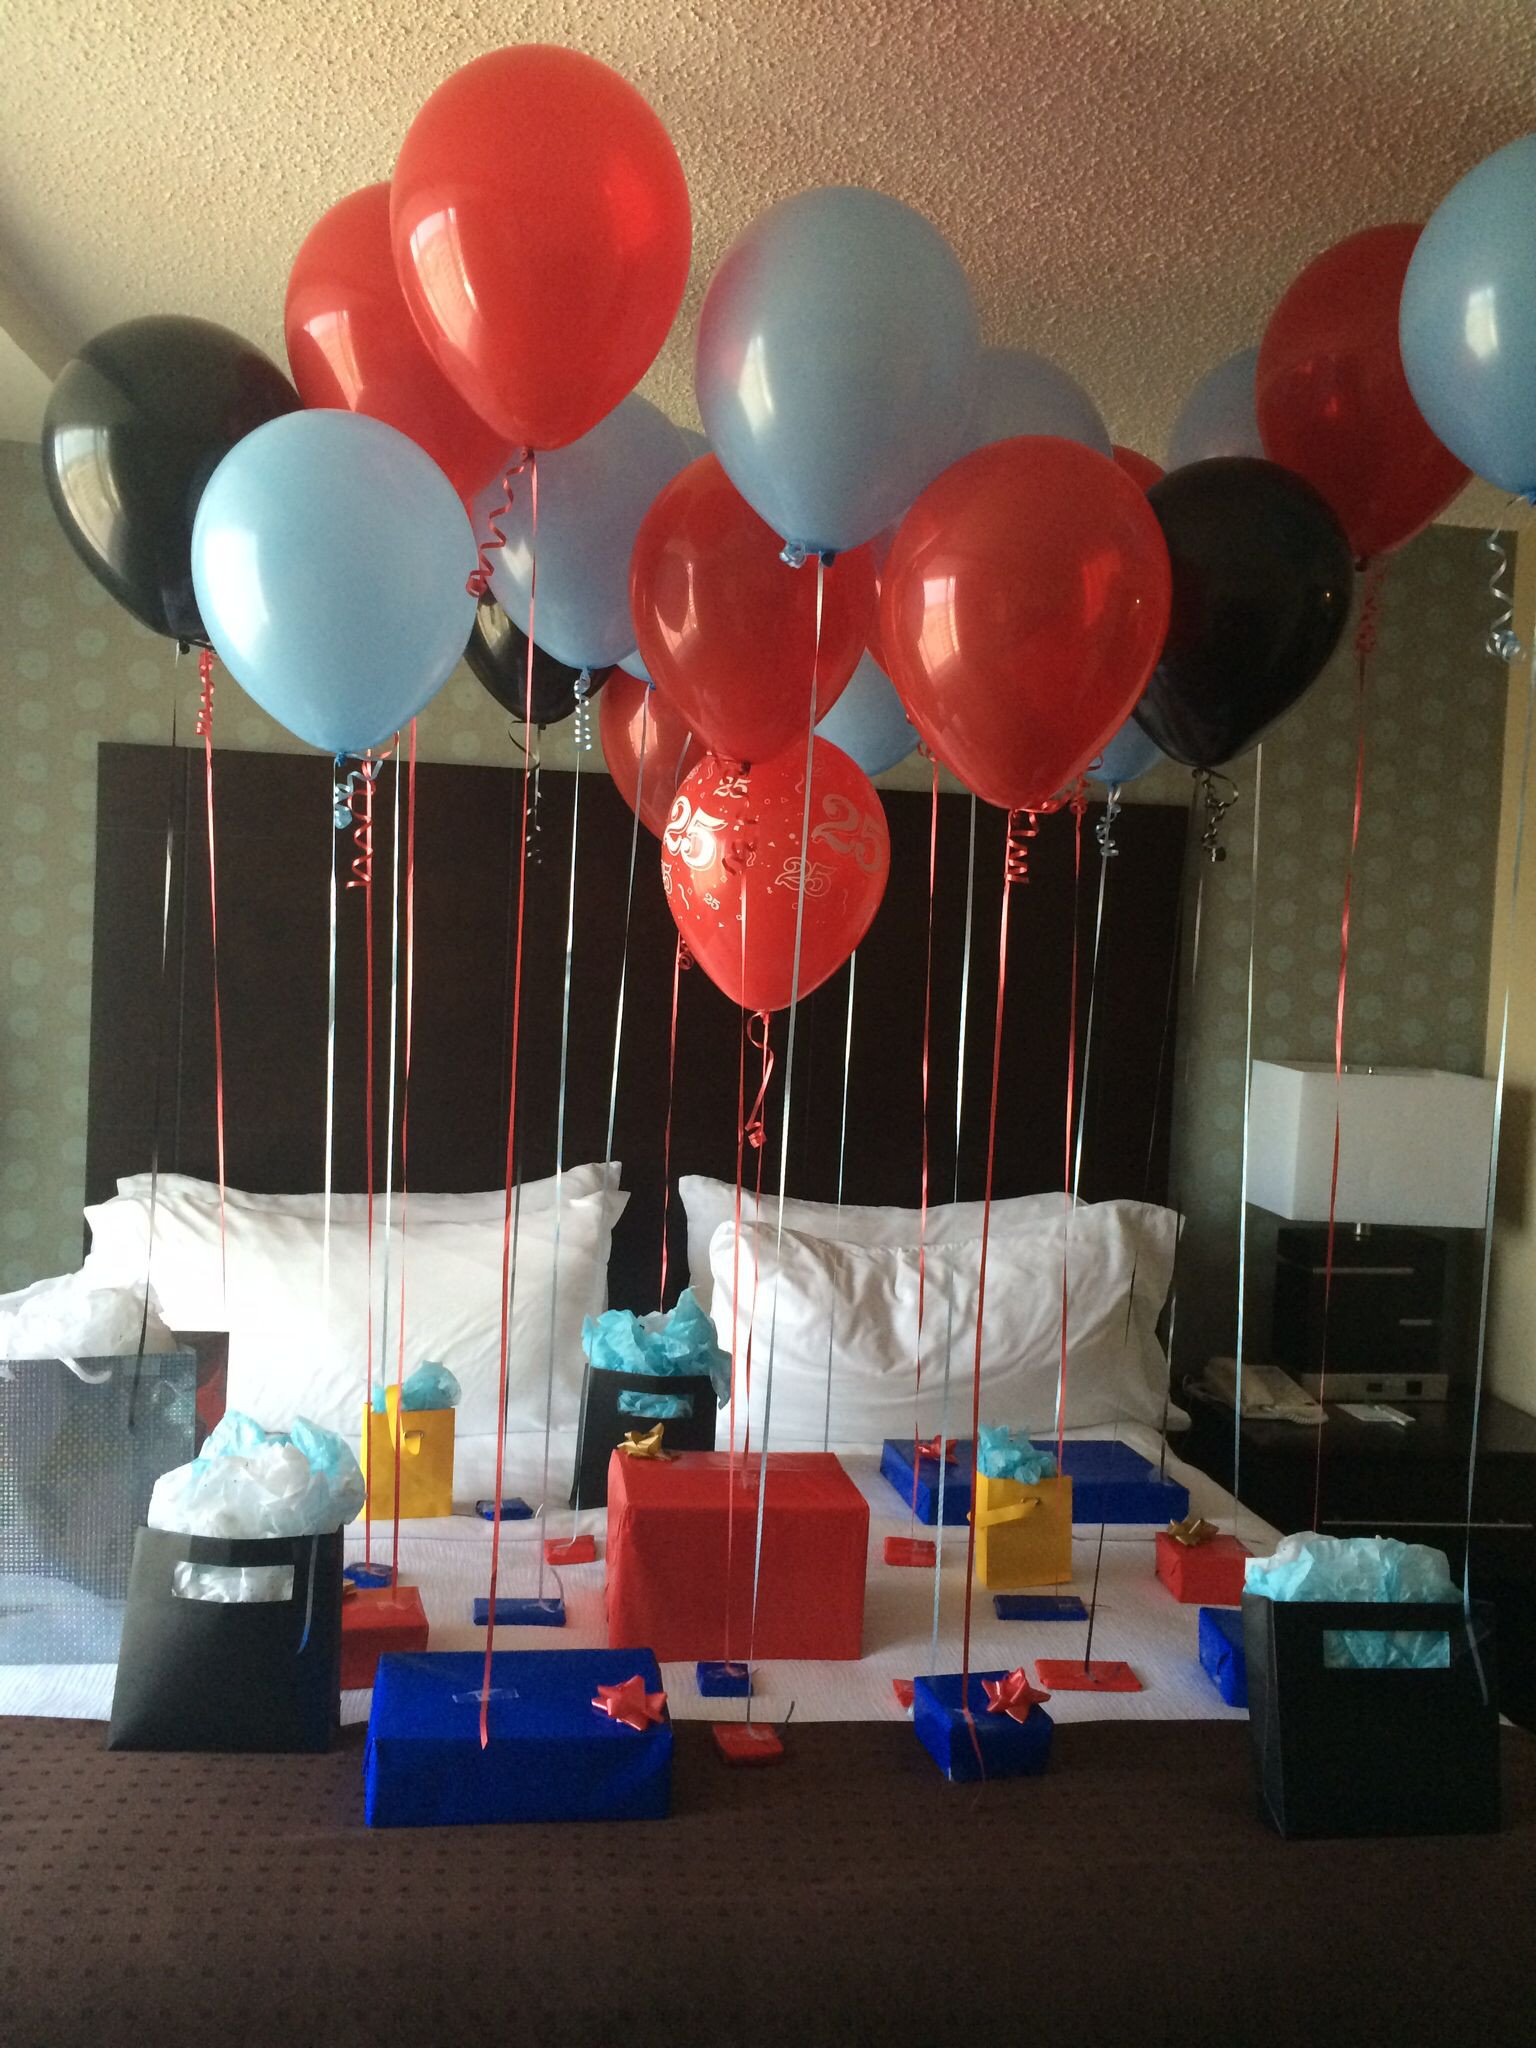 Surprise Gift Ideas For Boyfriend
 25 ts for 25th birthday Amazing birthday idea He loved it